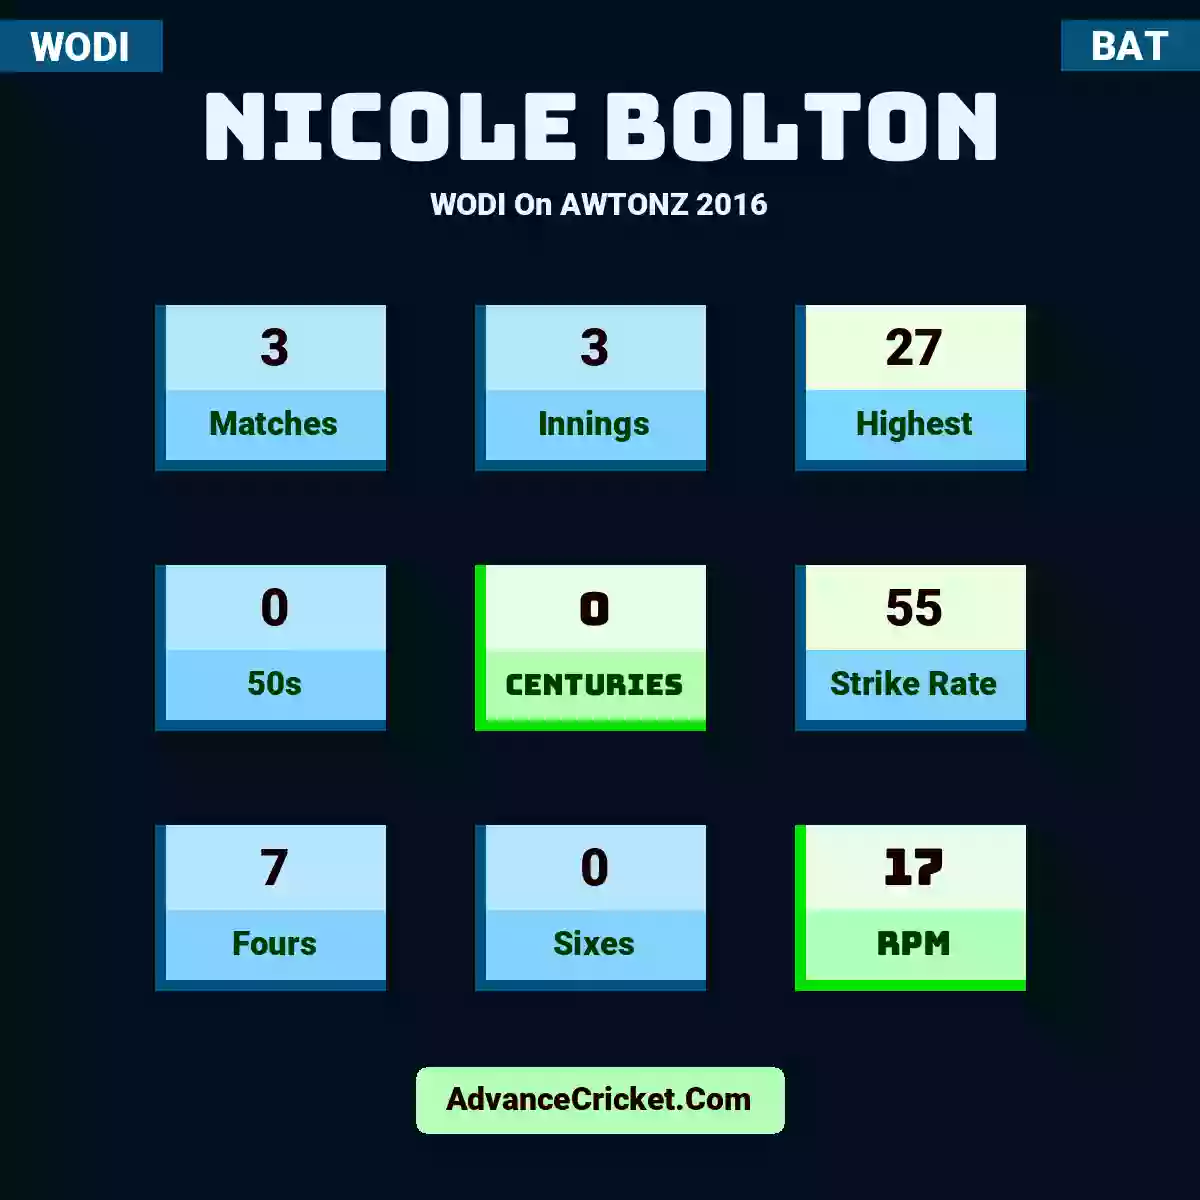 Nicole Bolton WODI  On AWTONZ 2016, Nicole Bolton played 3 matches, scored 27 runs as highest, 0 half-centuries, and 0 centuries, with a strike rate of 55. N.Bolton hit 7 fours and 0 sixes, with an RPM of 17.